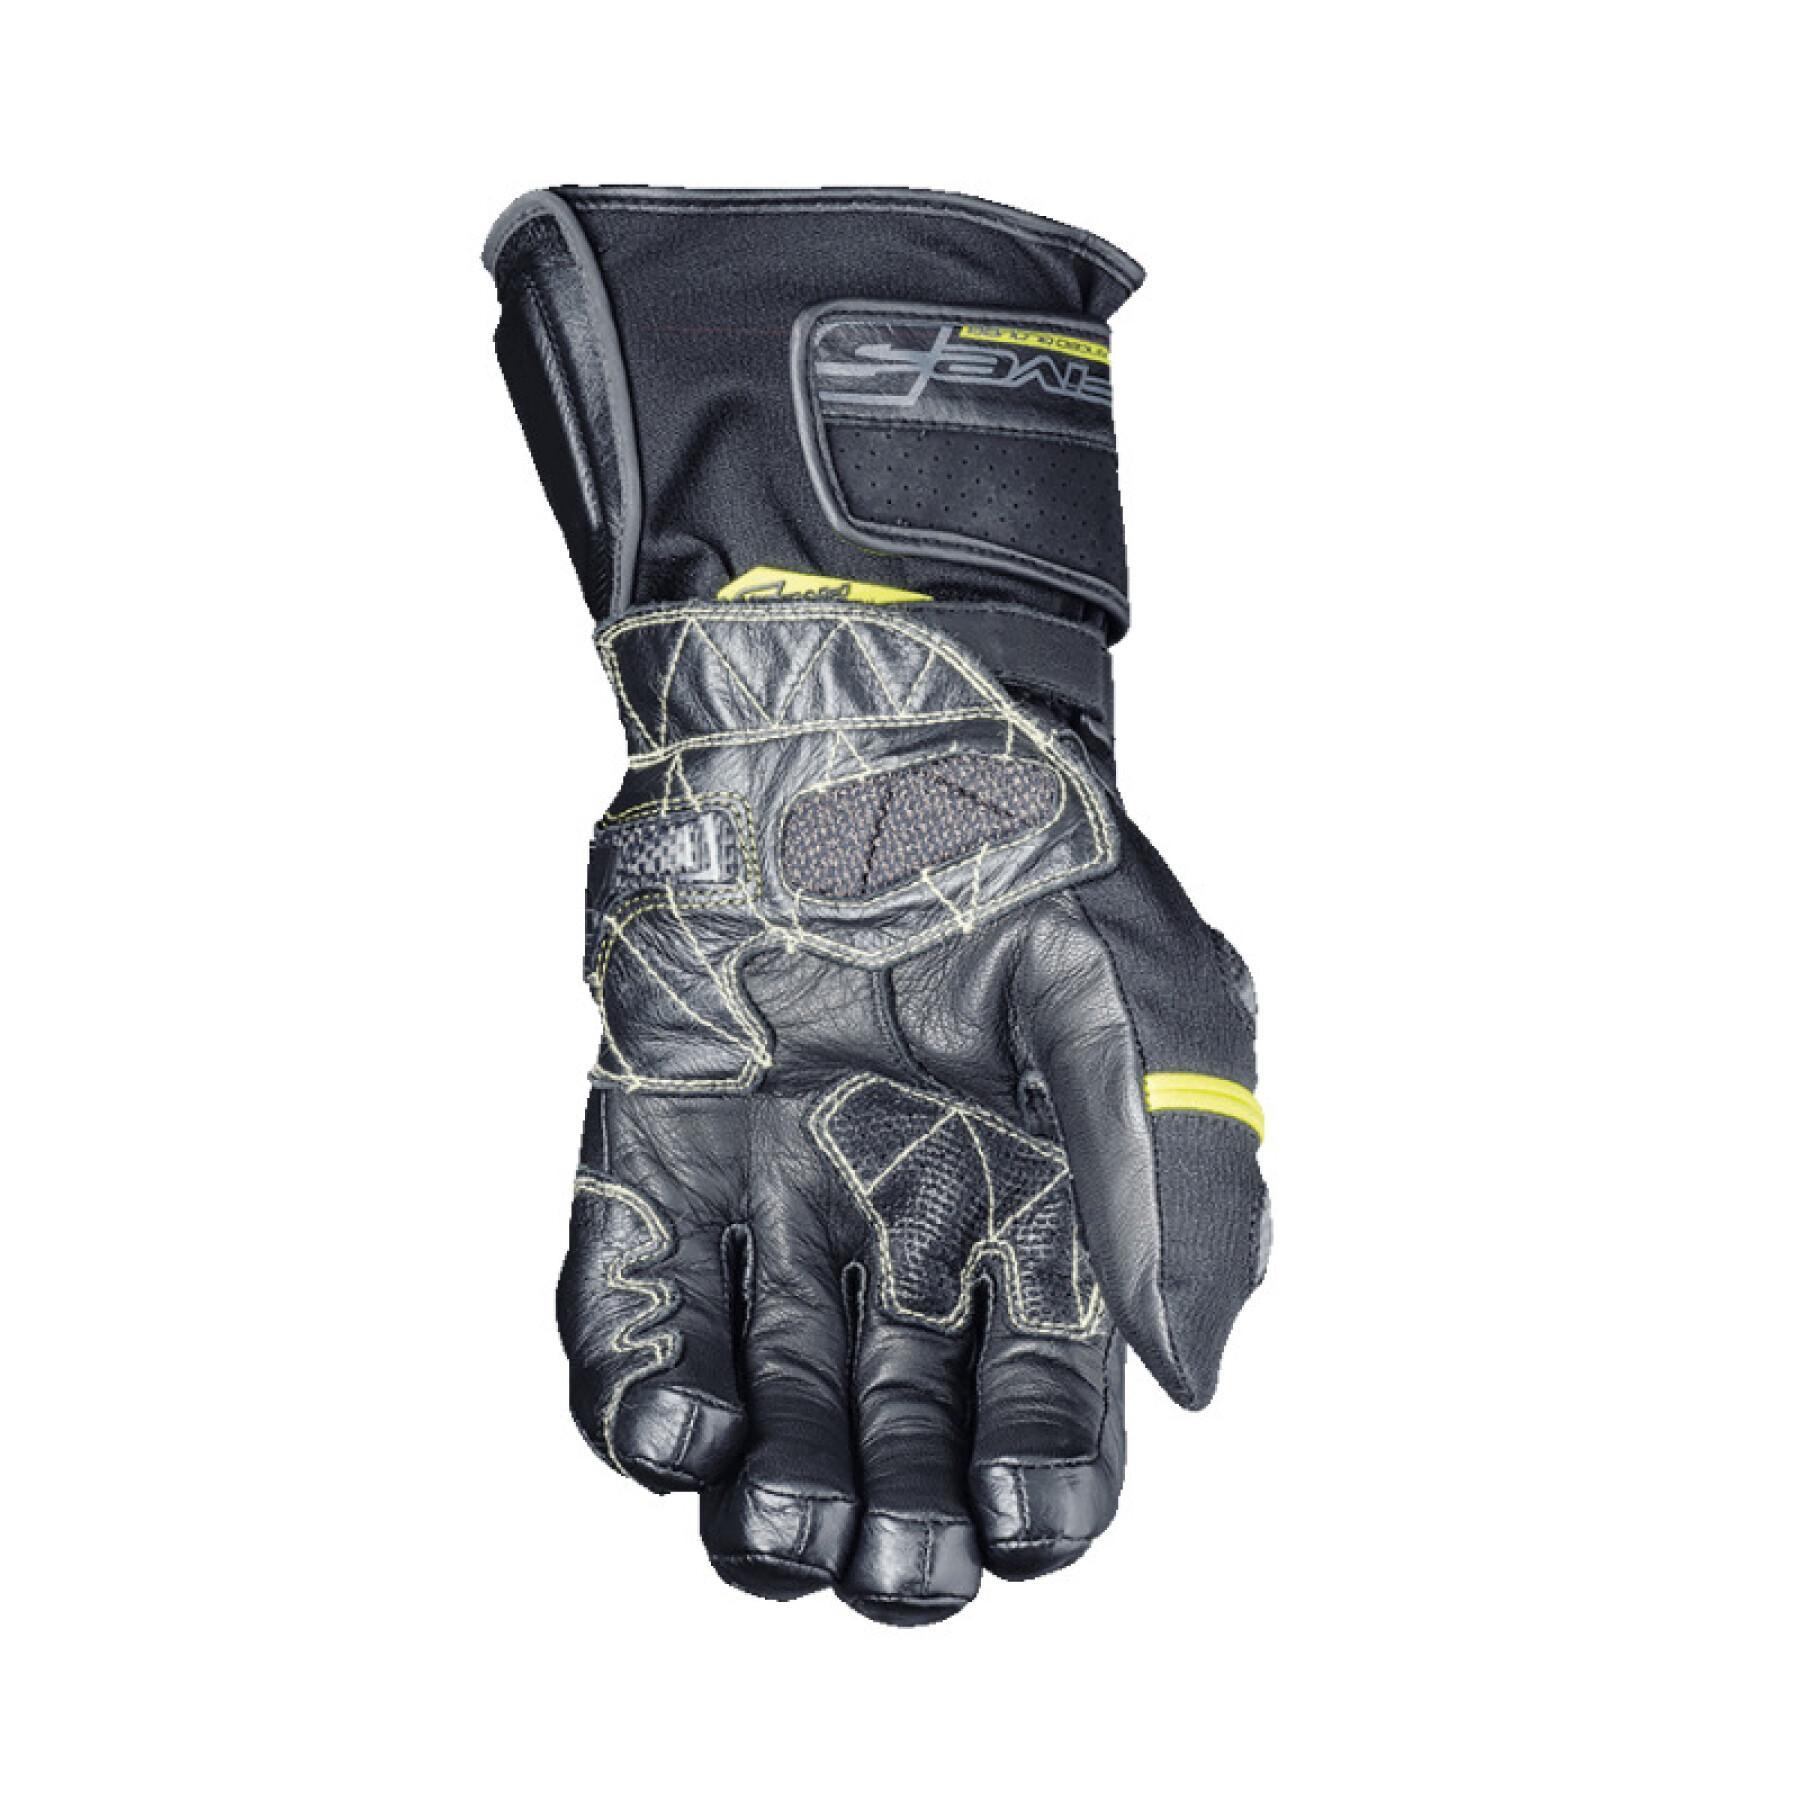 Winter leather motorcycle gloves Five WFX1 WP